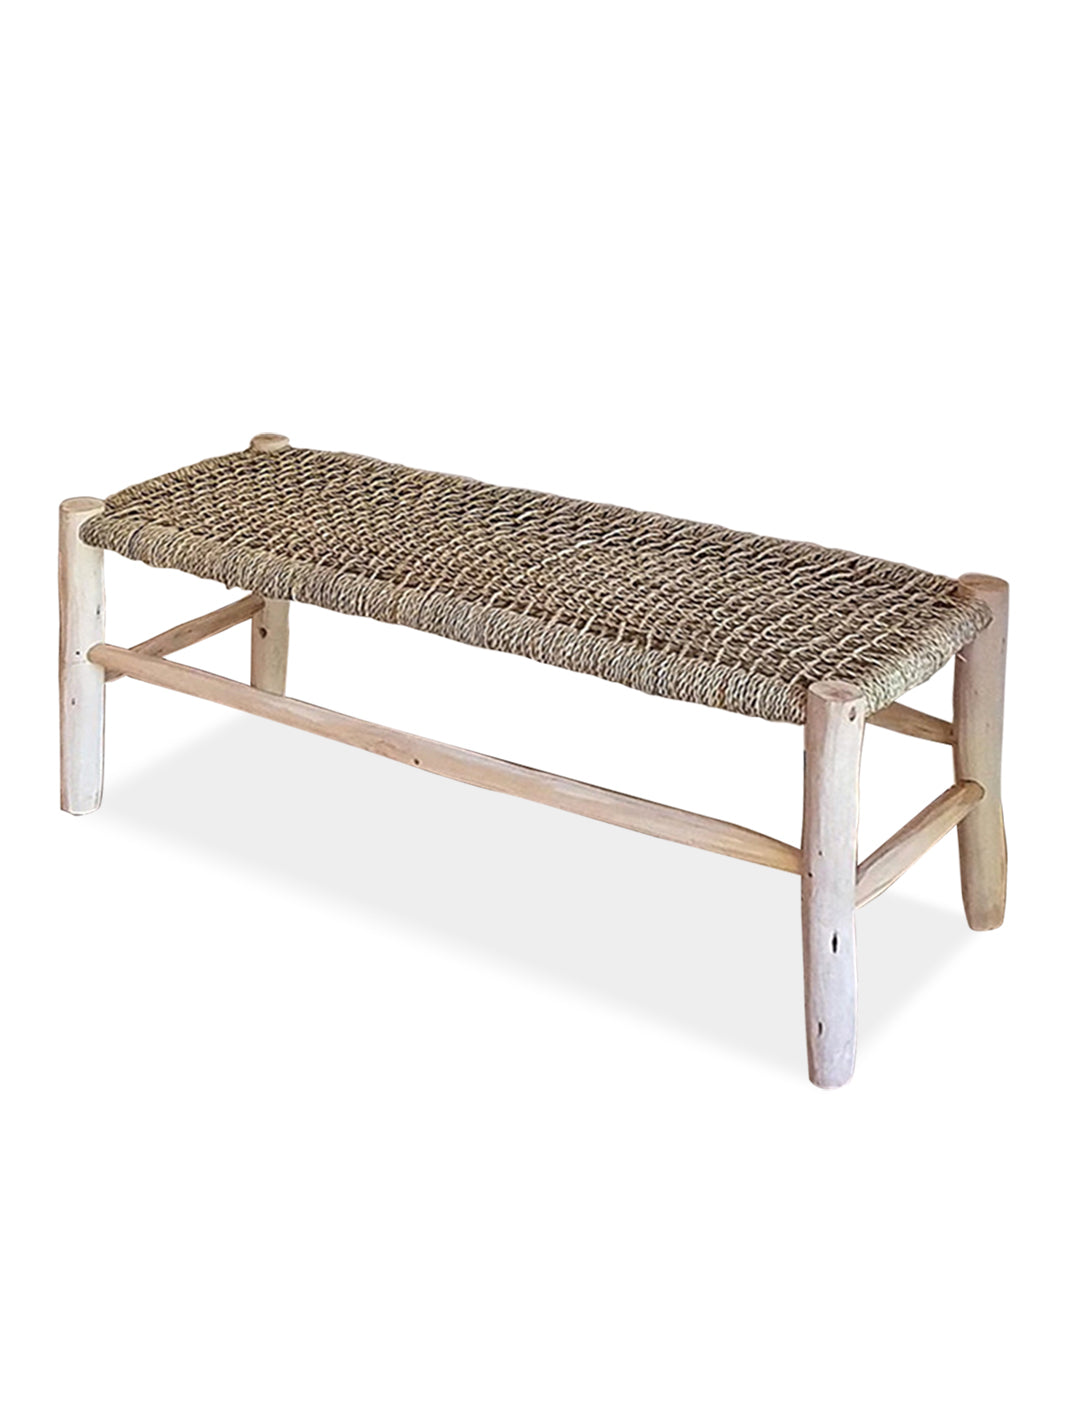 Handcrafted Natural Braiding Solid Wood Bench Libitii Benches LIB-0059